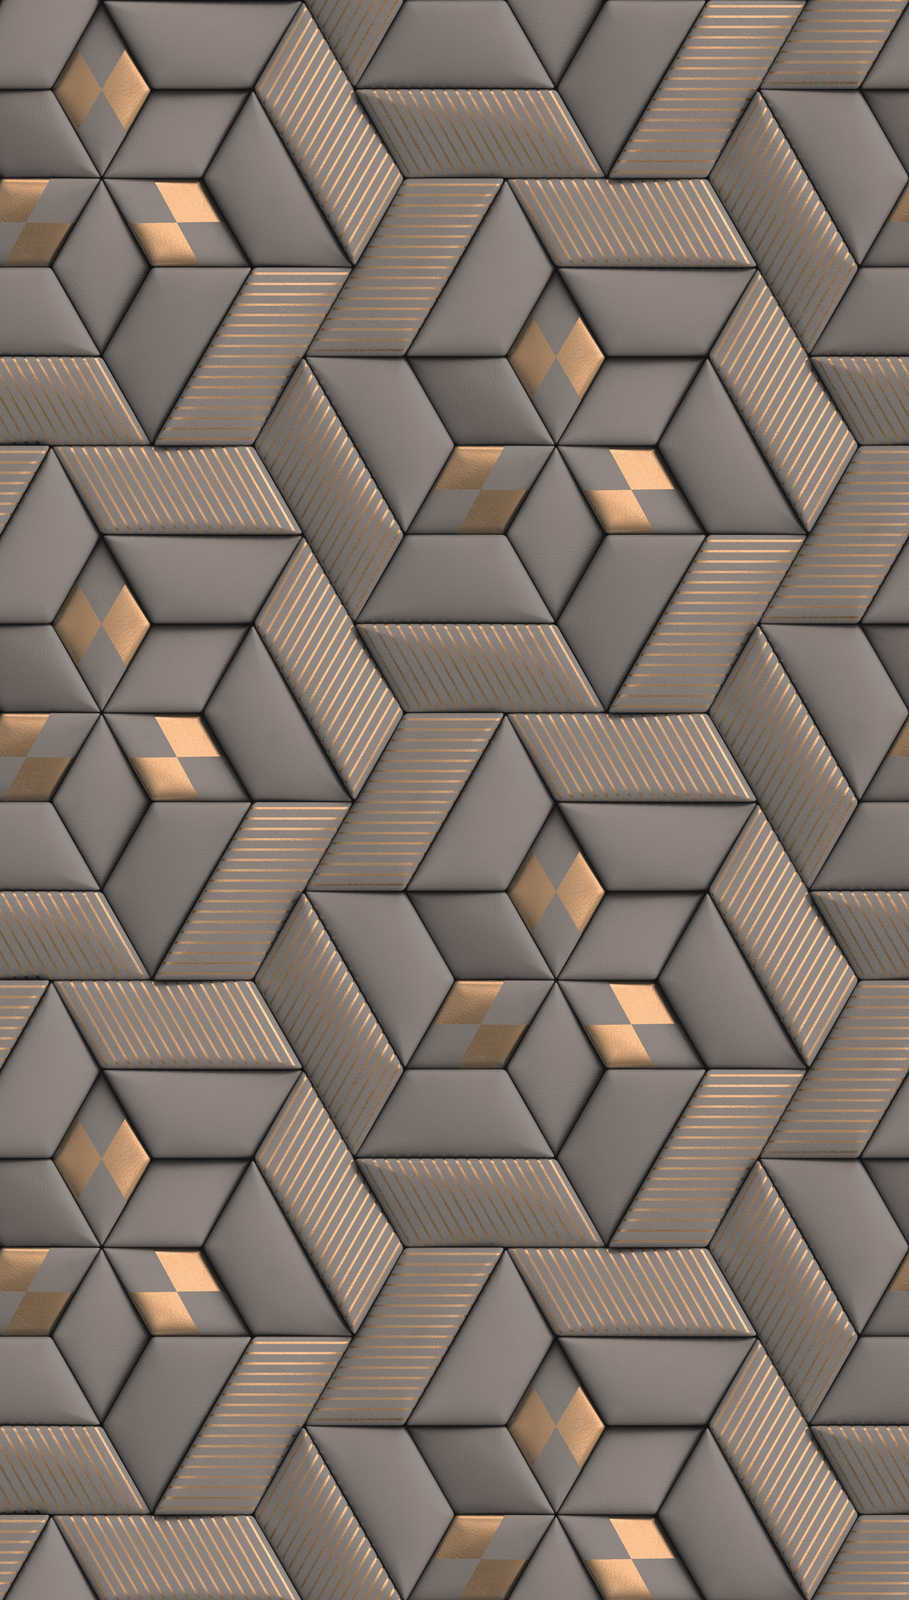             Abstract pattern wallpaper with 3D optics - grey, taupe, bronze
        